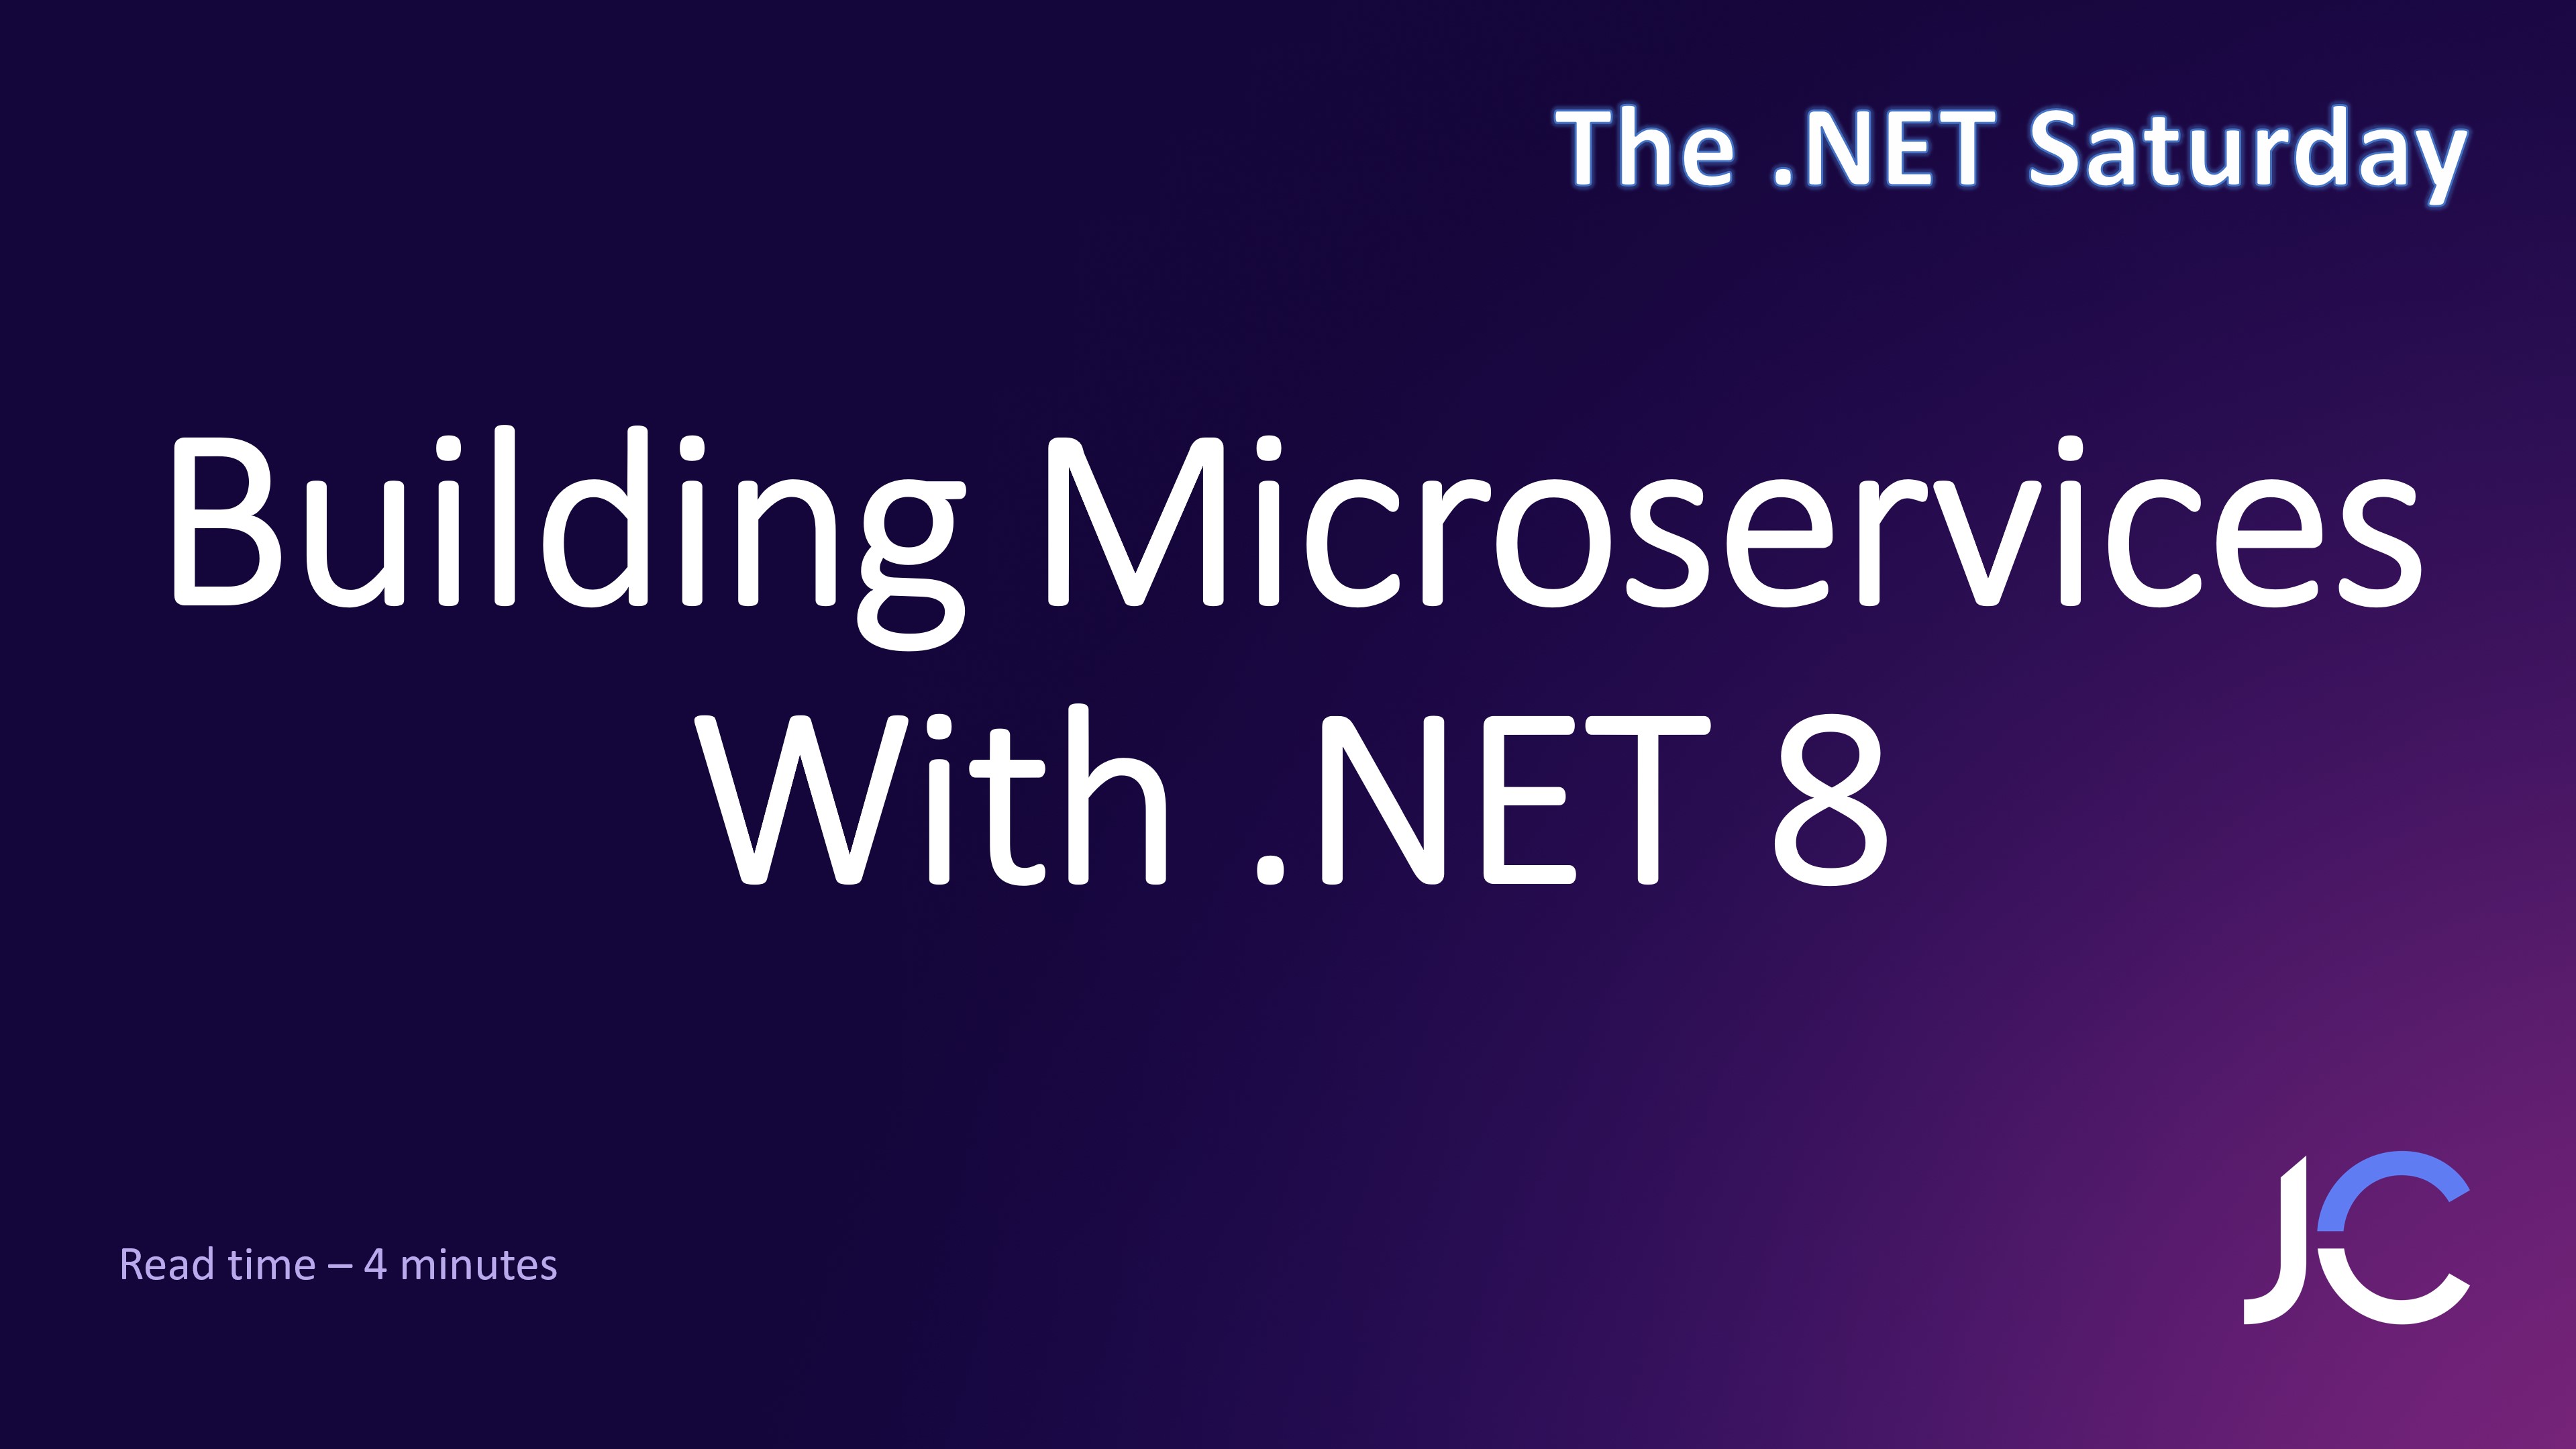 Building Microservices With .NET 8